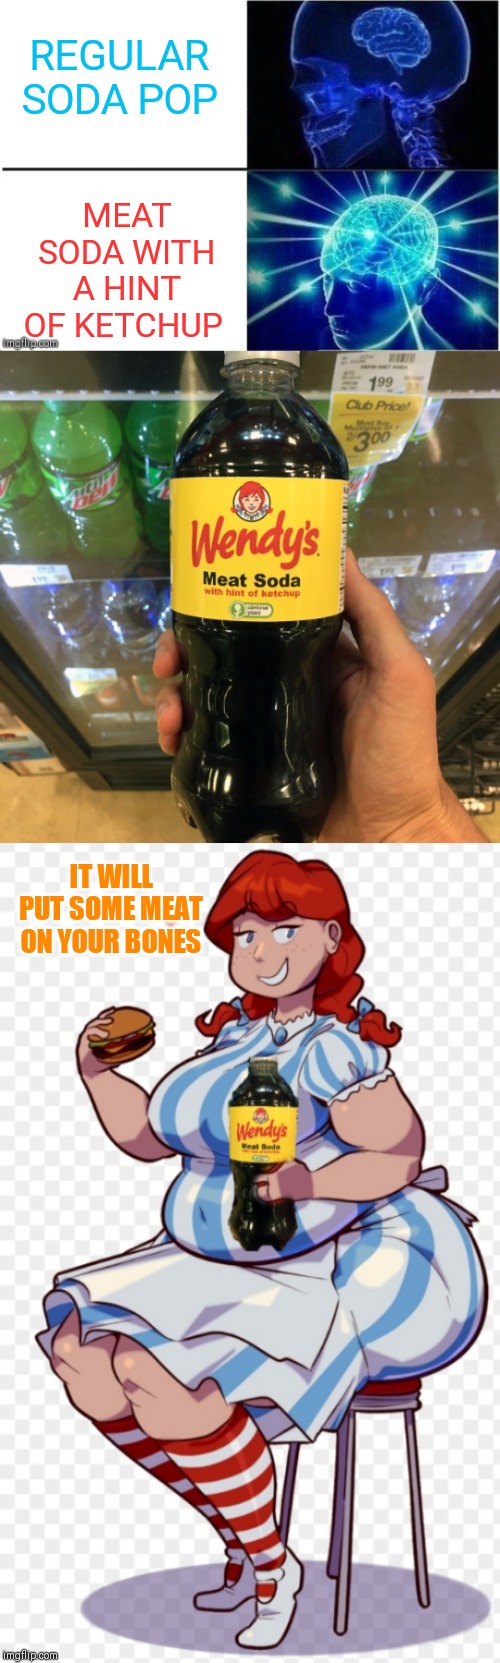 Getcha Some ;) | REGULAR SODA POP; MEAT SODA WITH A HINT OF KETCHUP; IT WILL PUT SOME MEAT ON YOUR BONES | image tagged in memes,wendy's,44colt,soda,coca cola,food | made w/ Imgflip meme maker